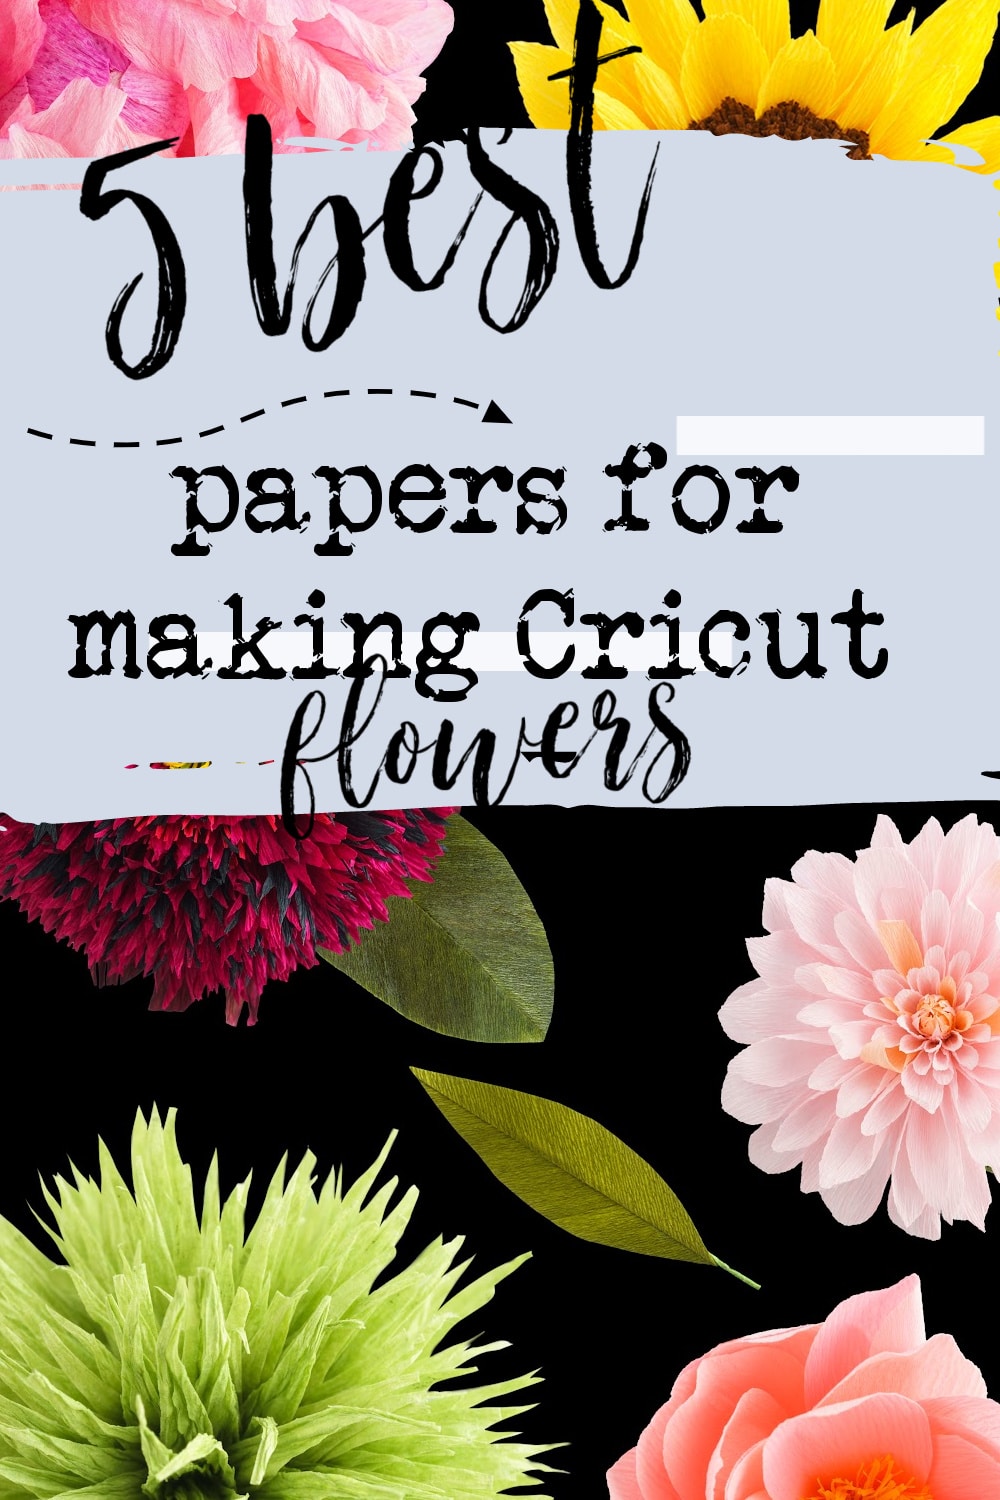 best papers for cricut flowers